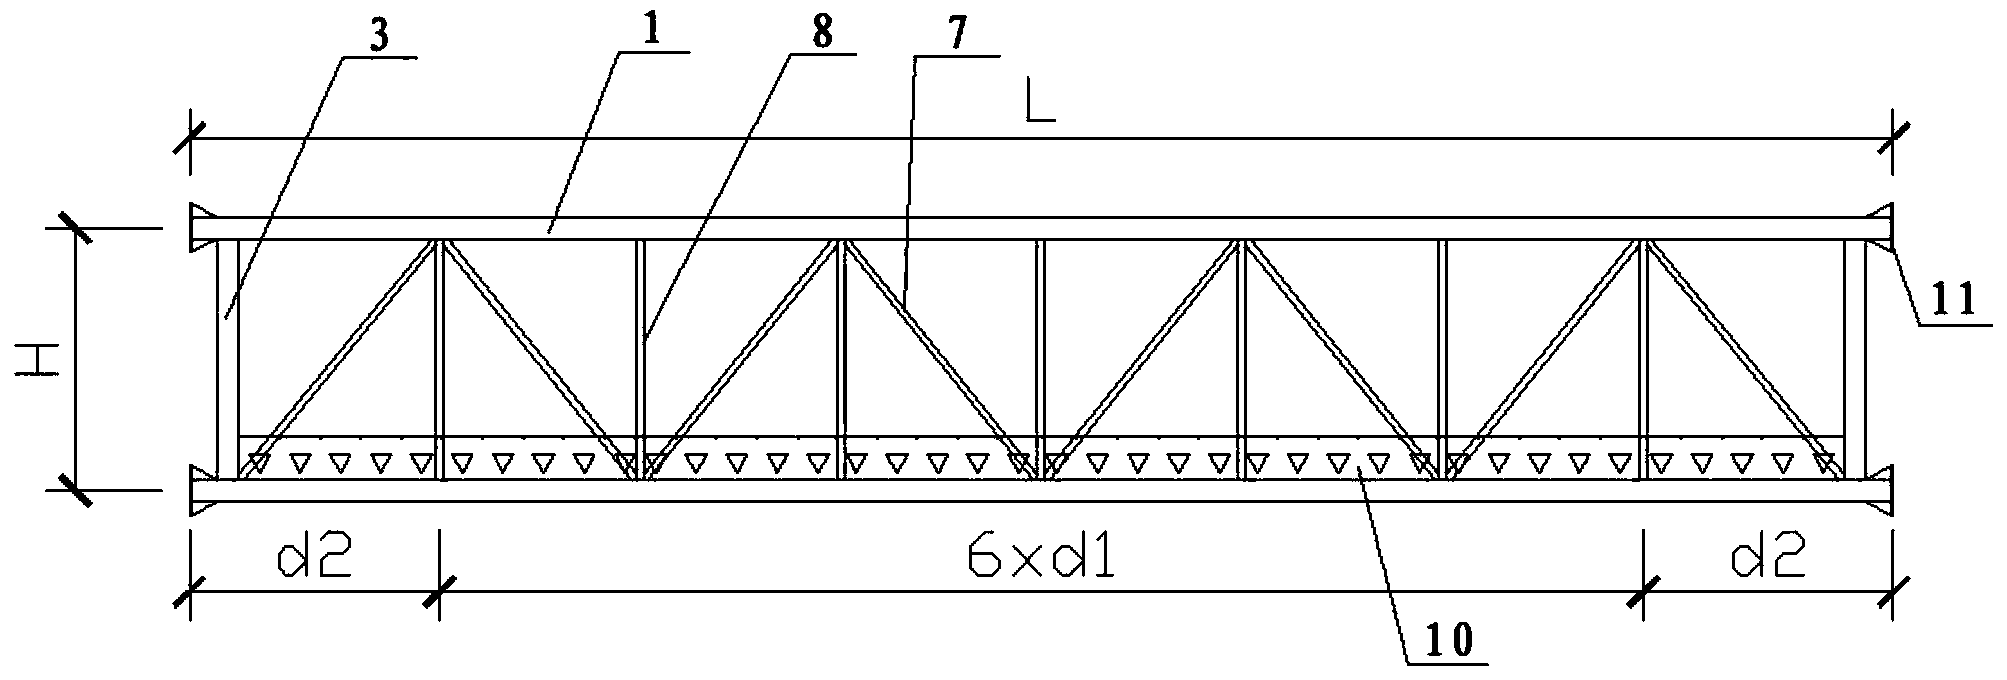 Light hanging basket applicable to bridge detection and maintenance operations